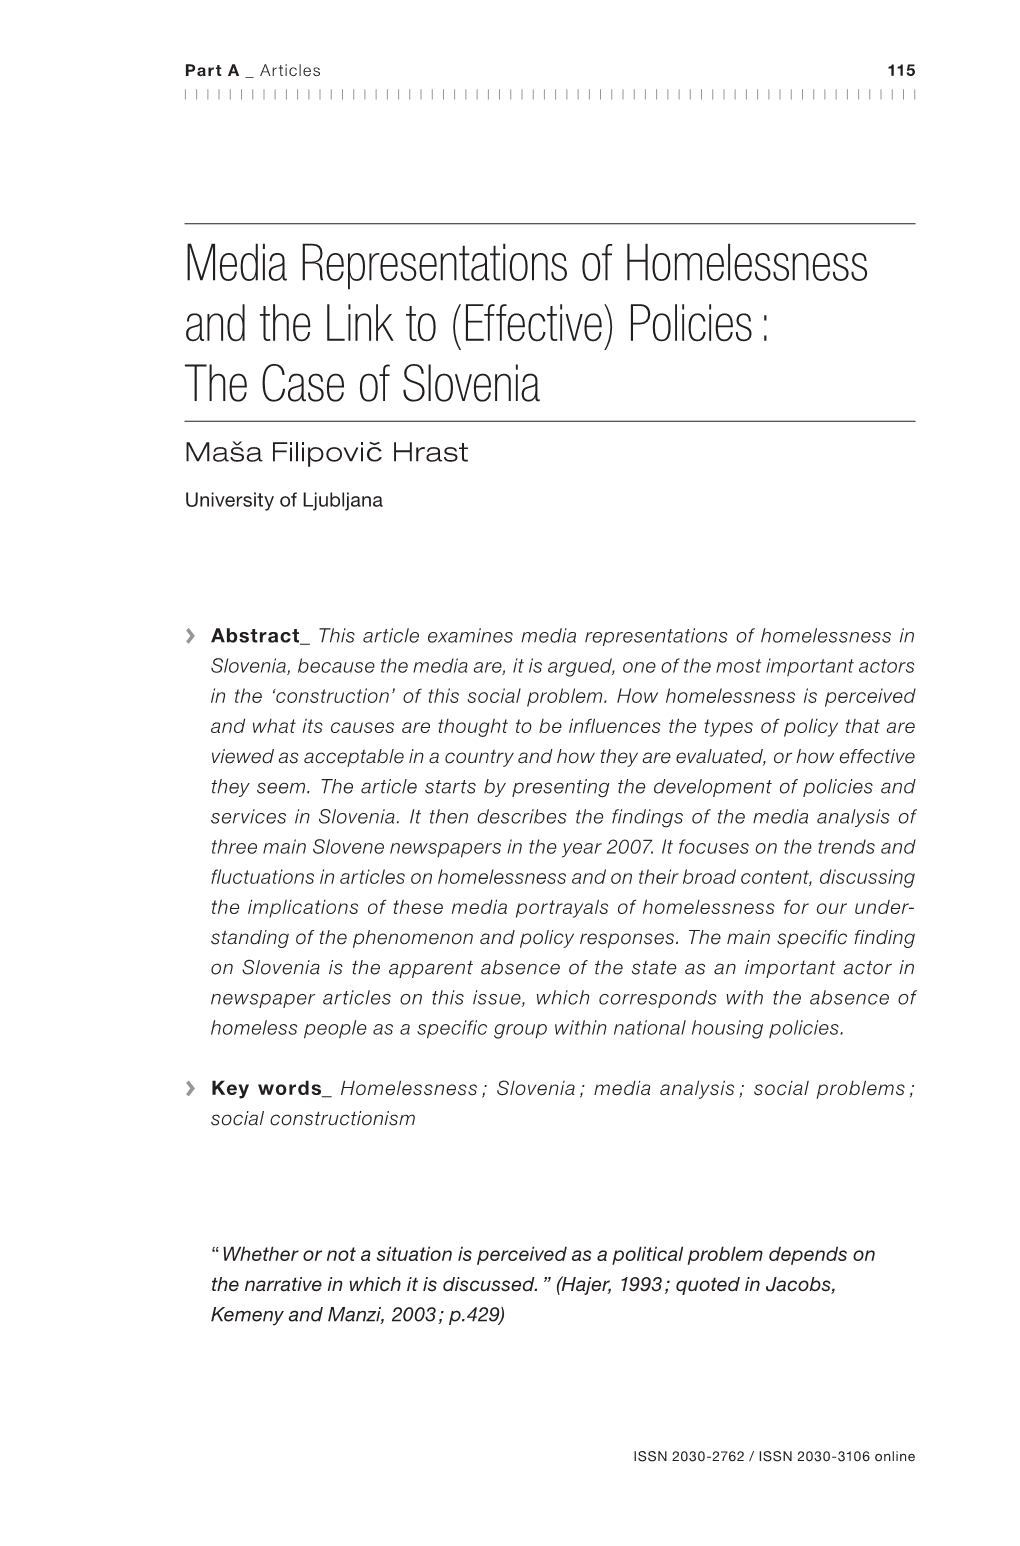 Media Representations of Homelessness and the Link to (Effective) Policies : the Case of Slovenia